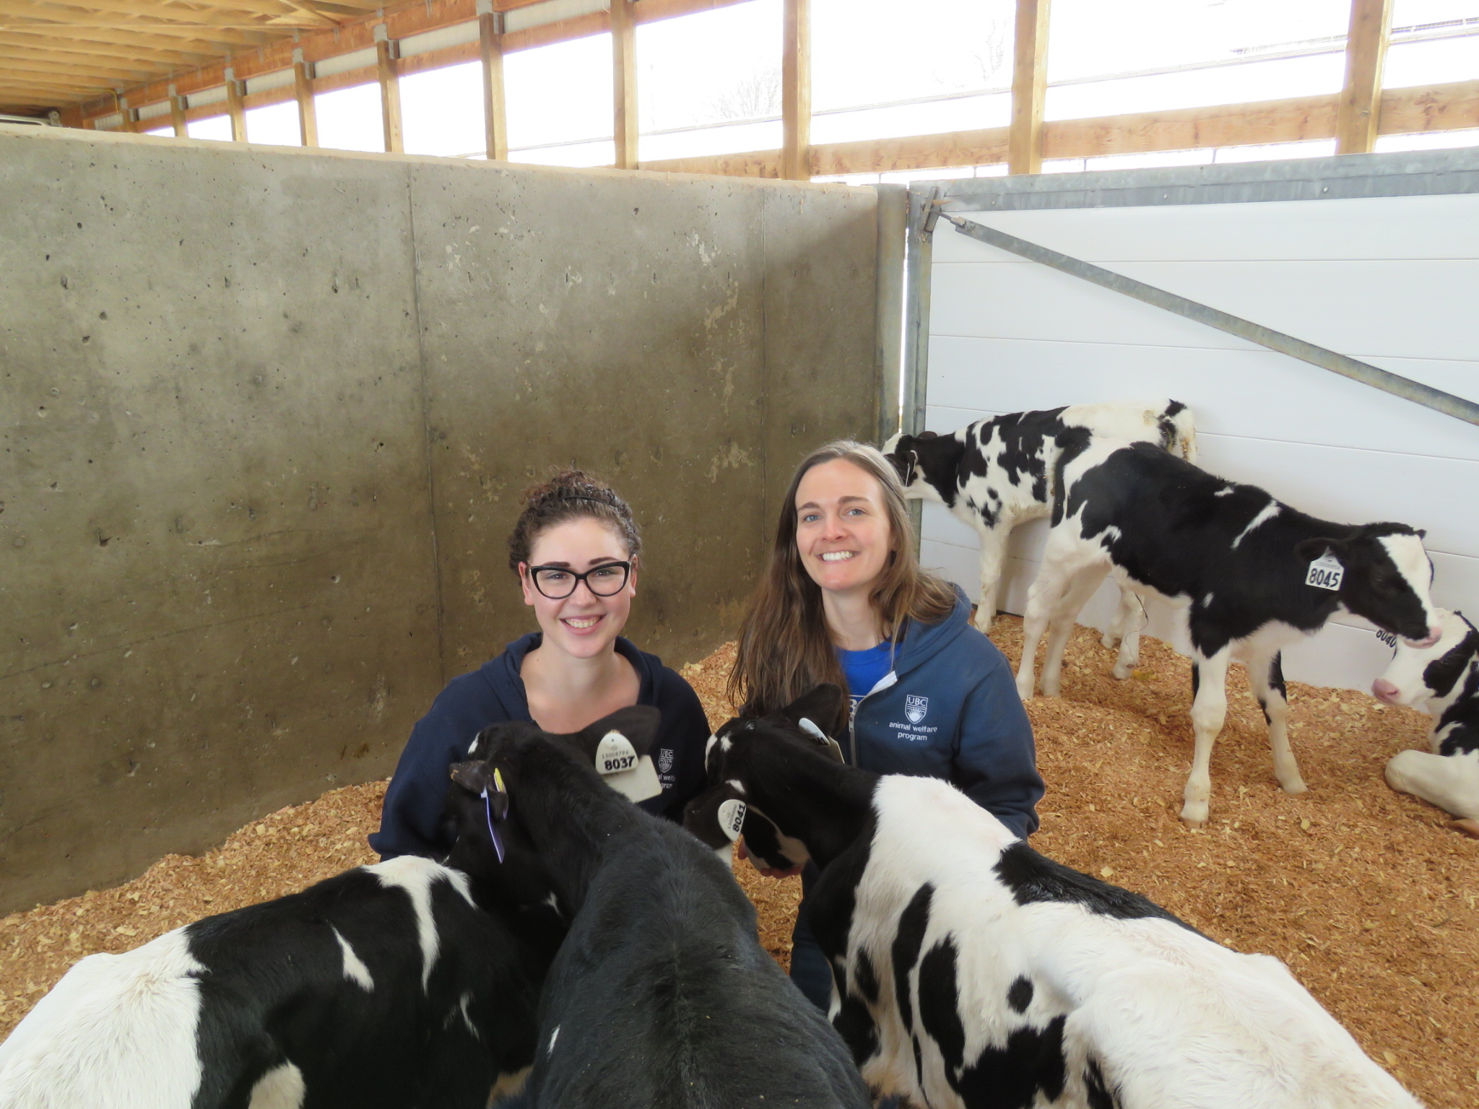 Using Realistic Evaluation to understand how interventions work on dairy farms